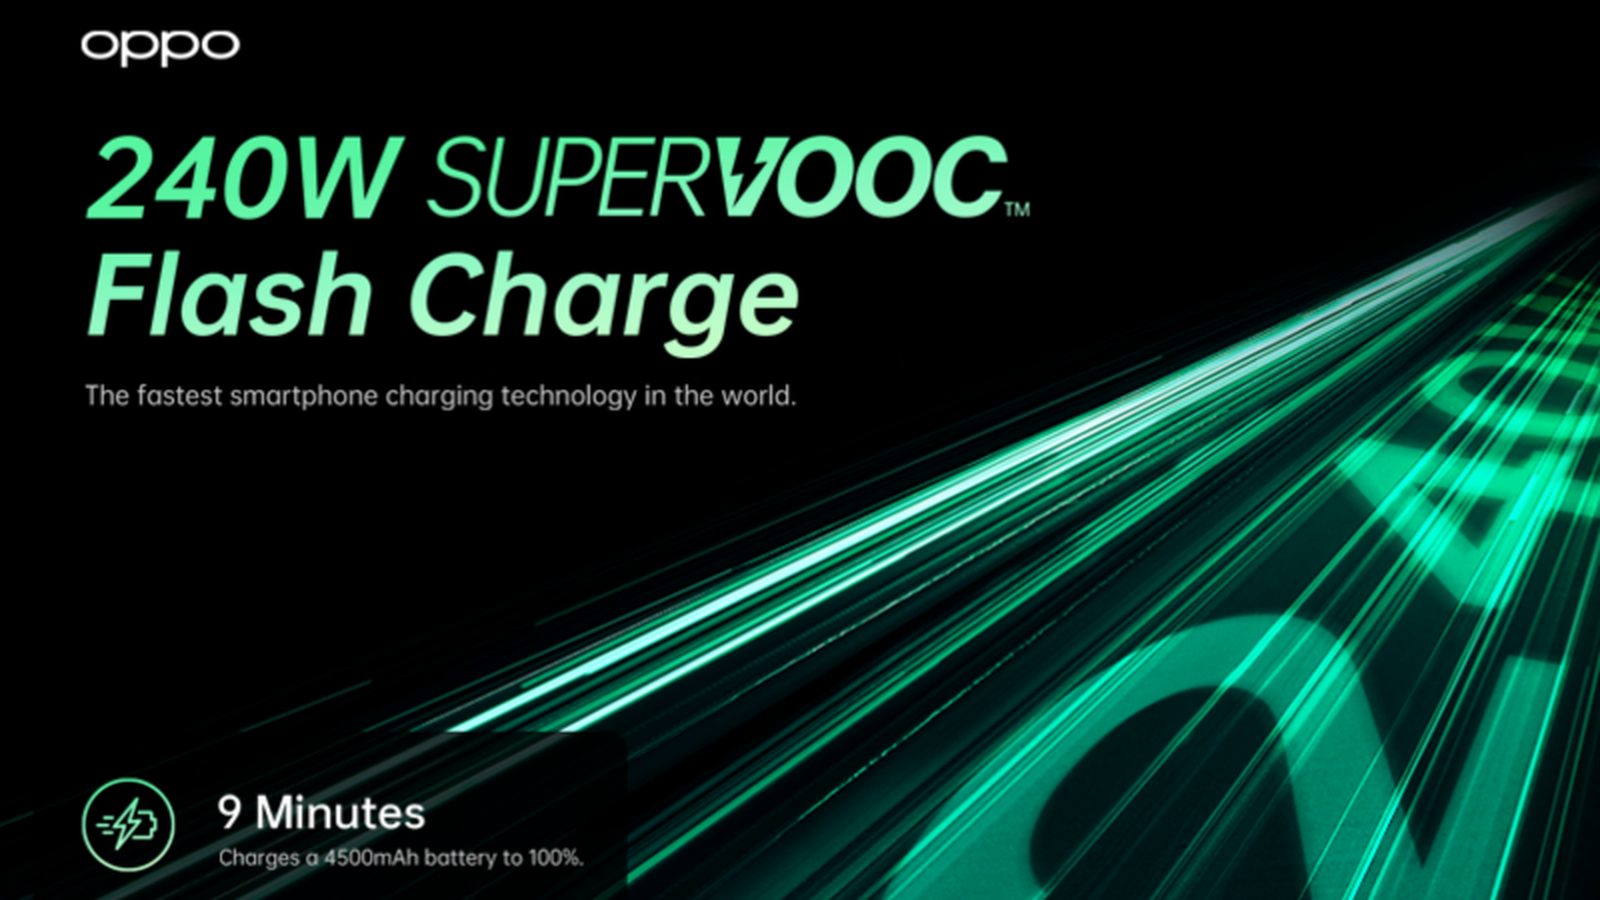 oppo 240w supervooc fast charging